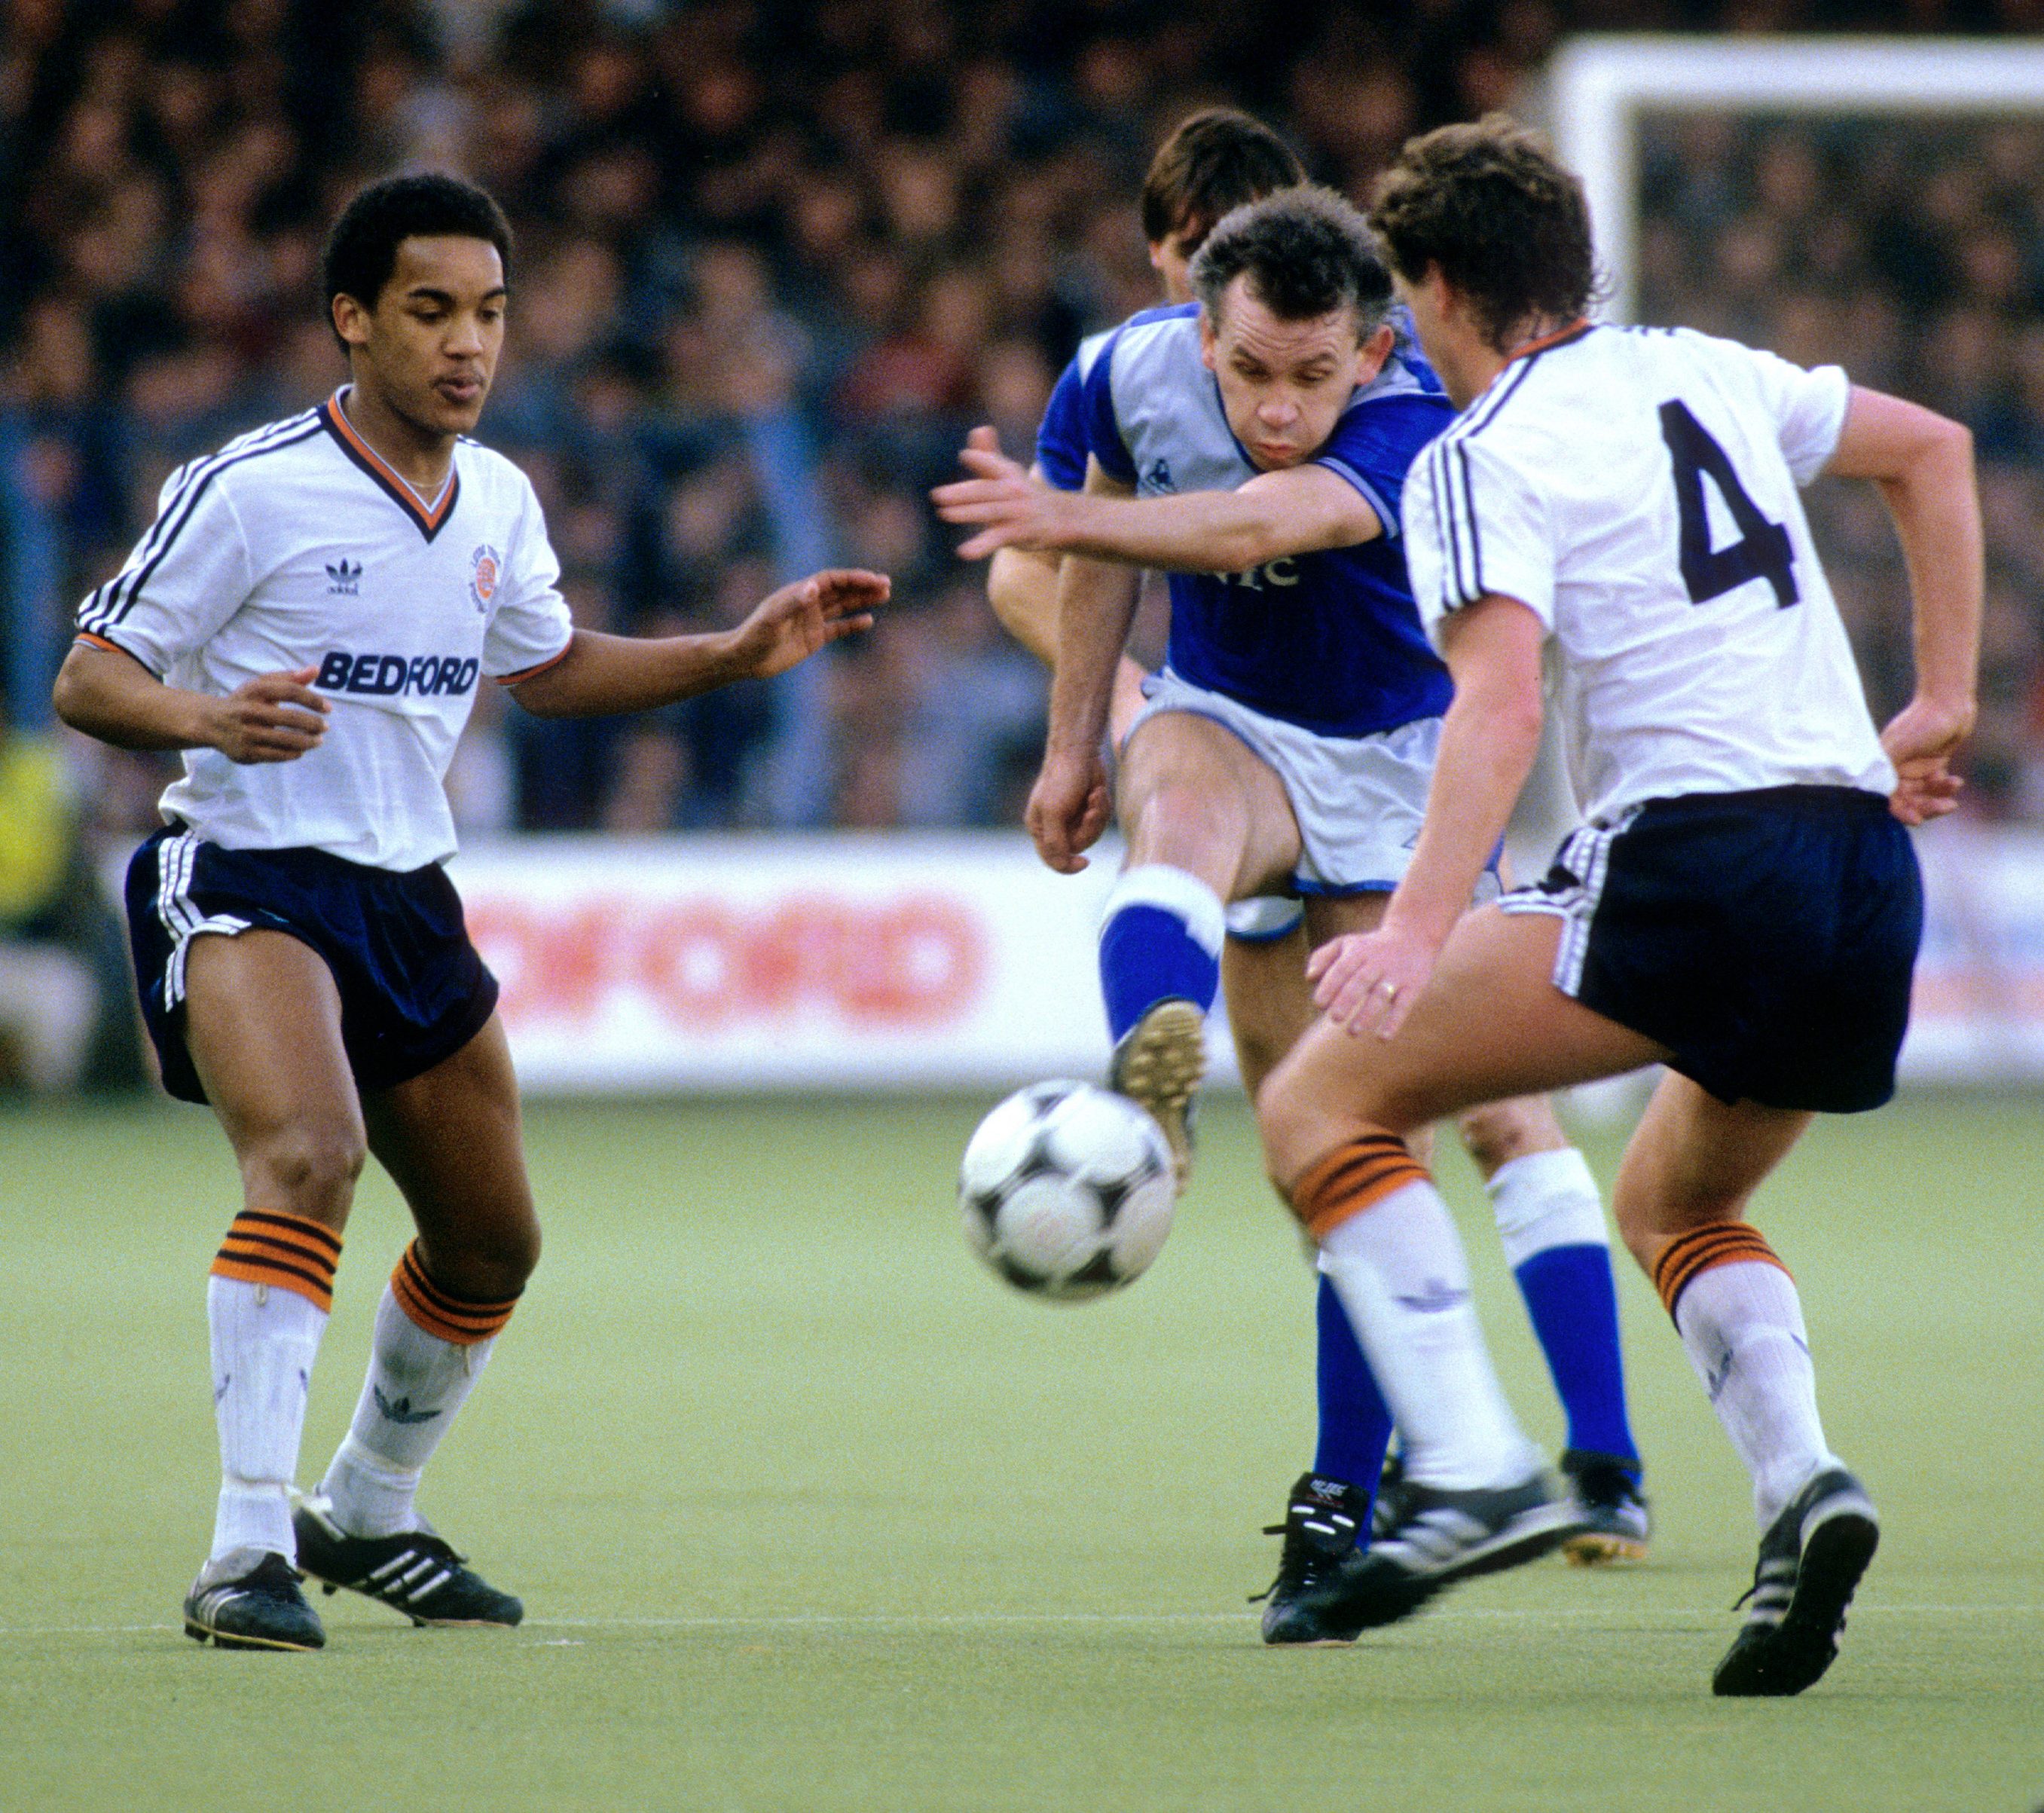 Inspired by QPR, Luton Town soon installed a plastic pitch in time for the 1984-85 season